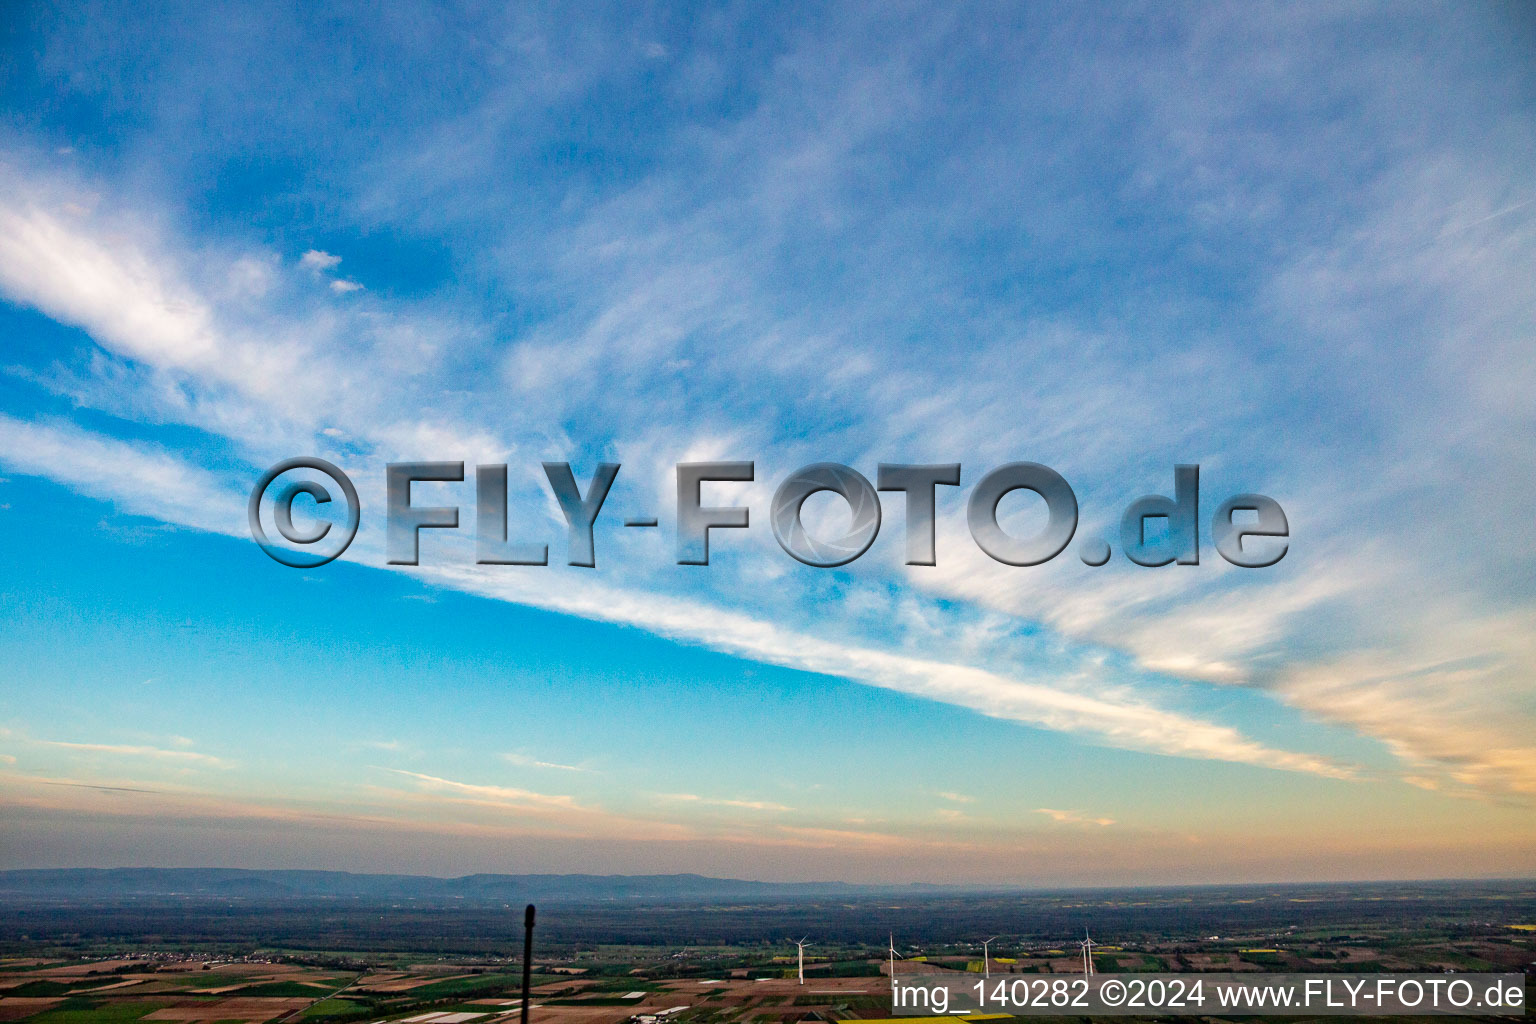 Wind farm in Freckenfeld in the state Rhineland-Palatinate, Germany from above